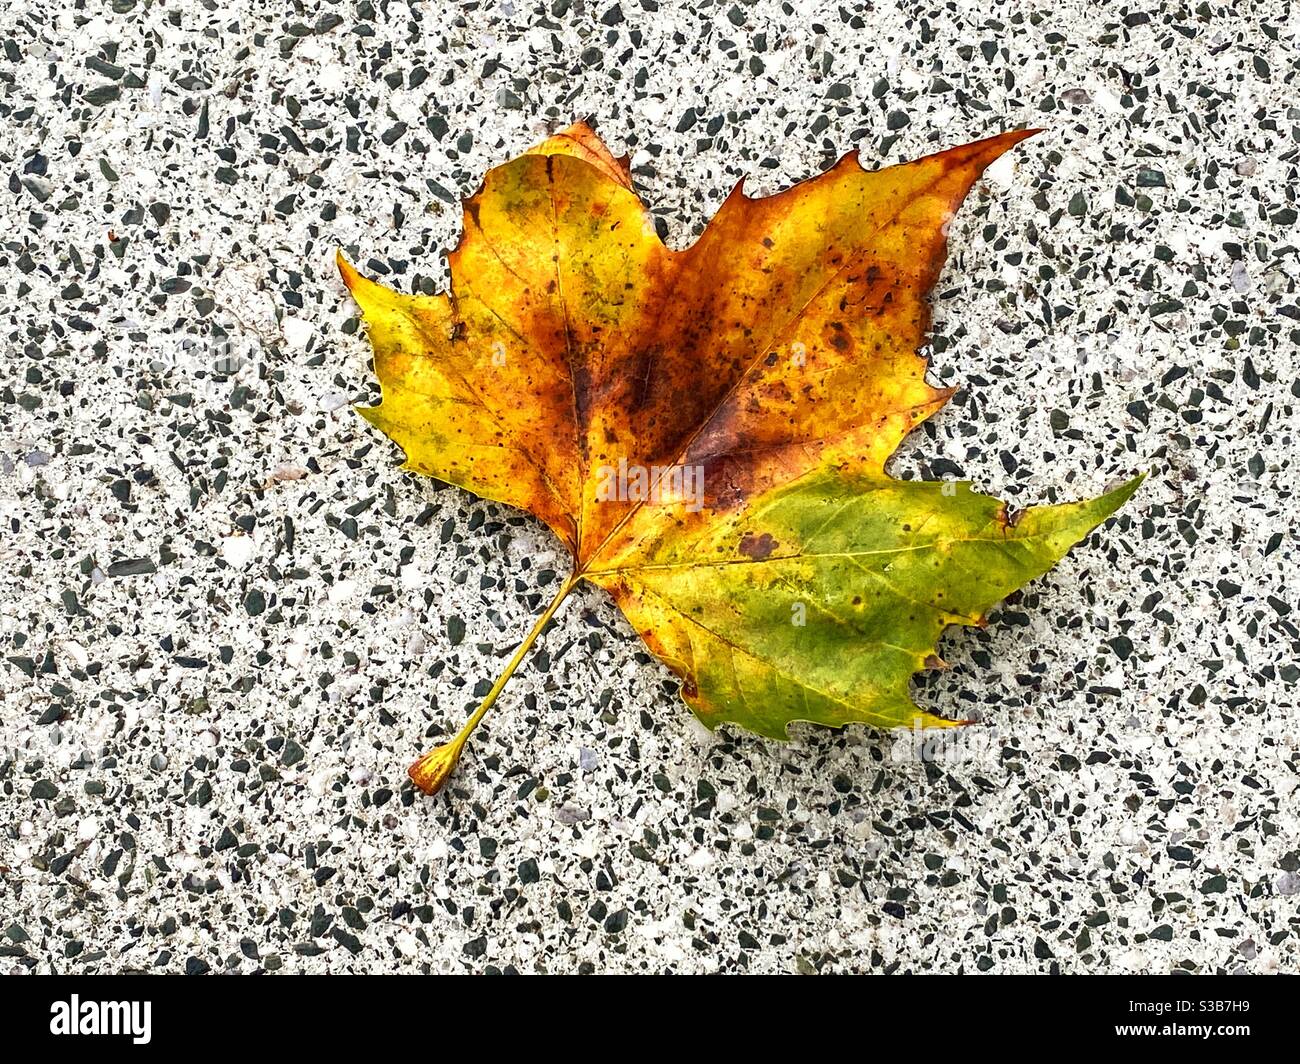 Dead leaf resting on the specked pattern of a patio slab Stock Photo